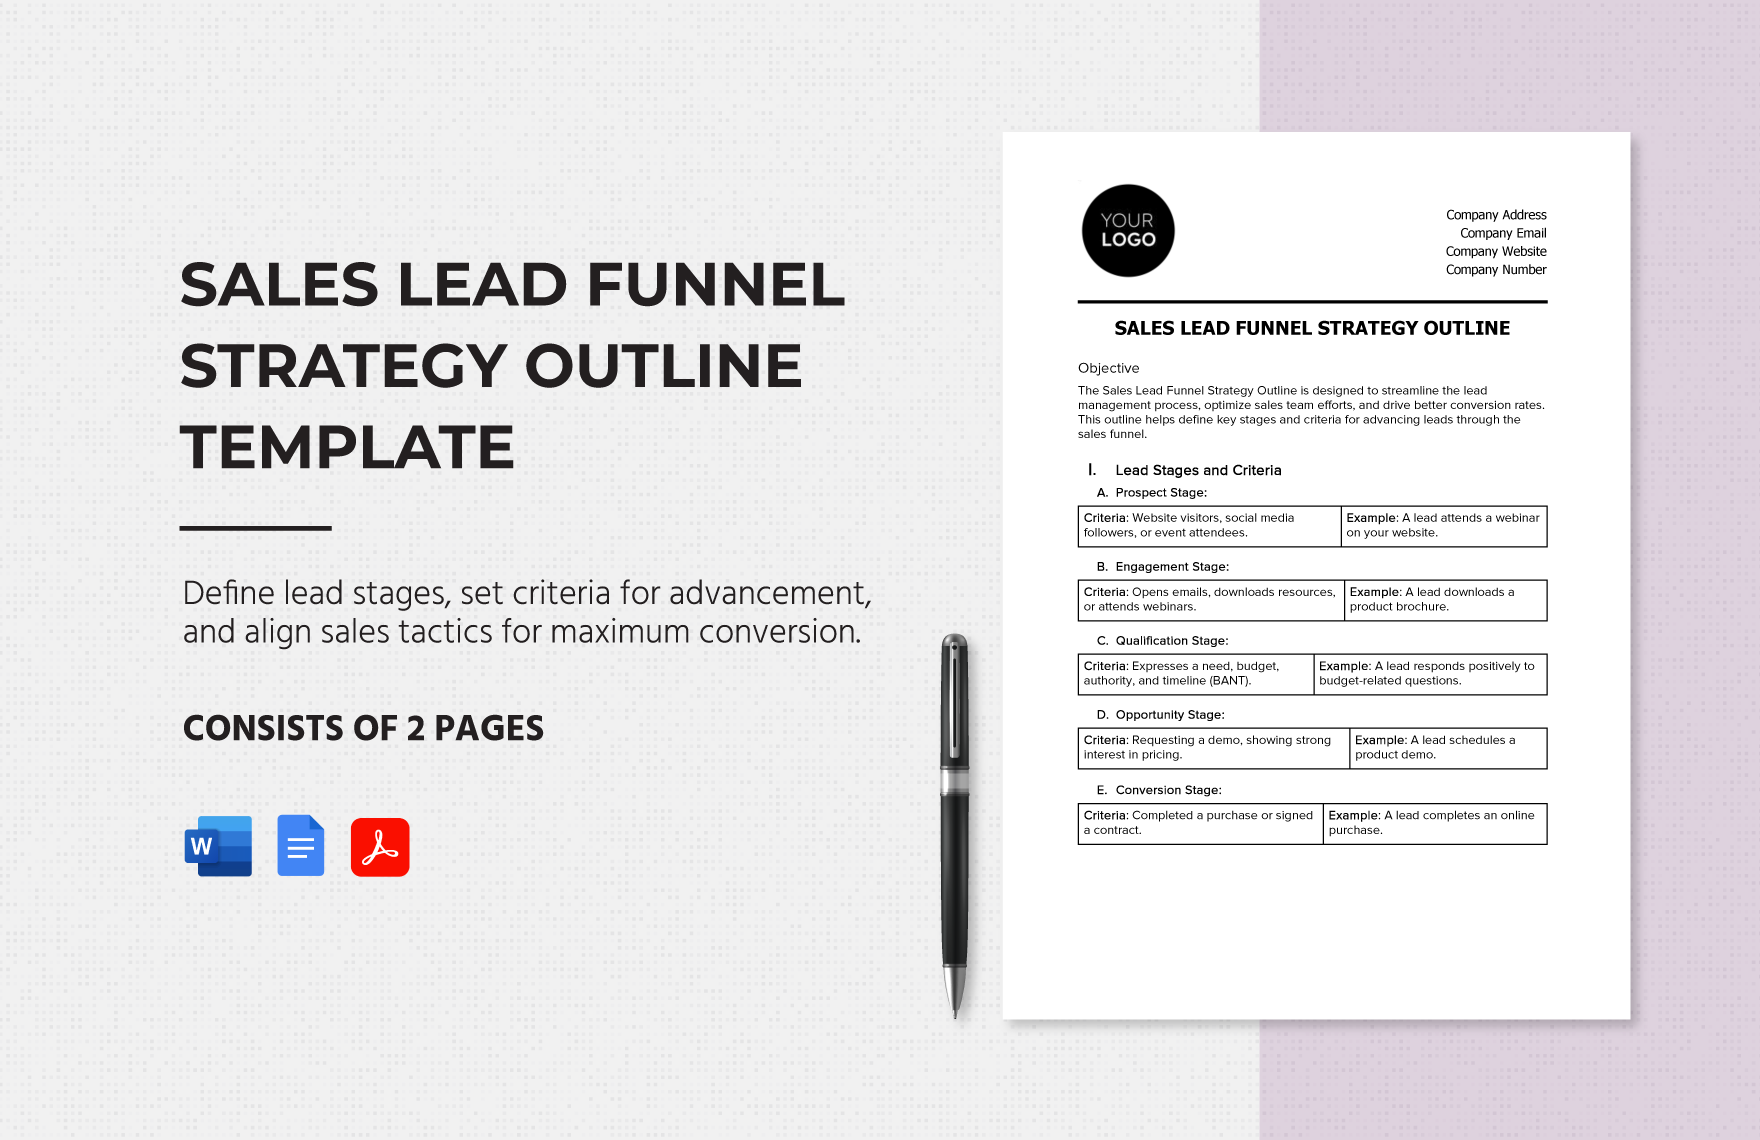 Sales Lead Funnel Strategy Outline Template in Word, Google Docs, PDF